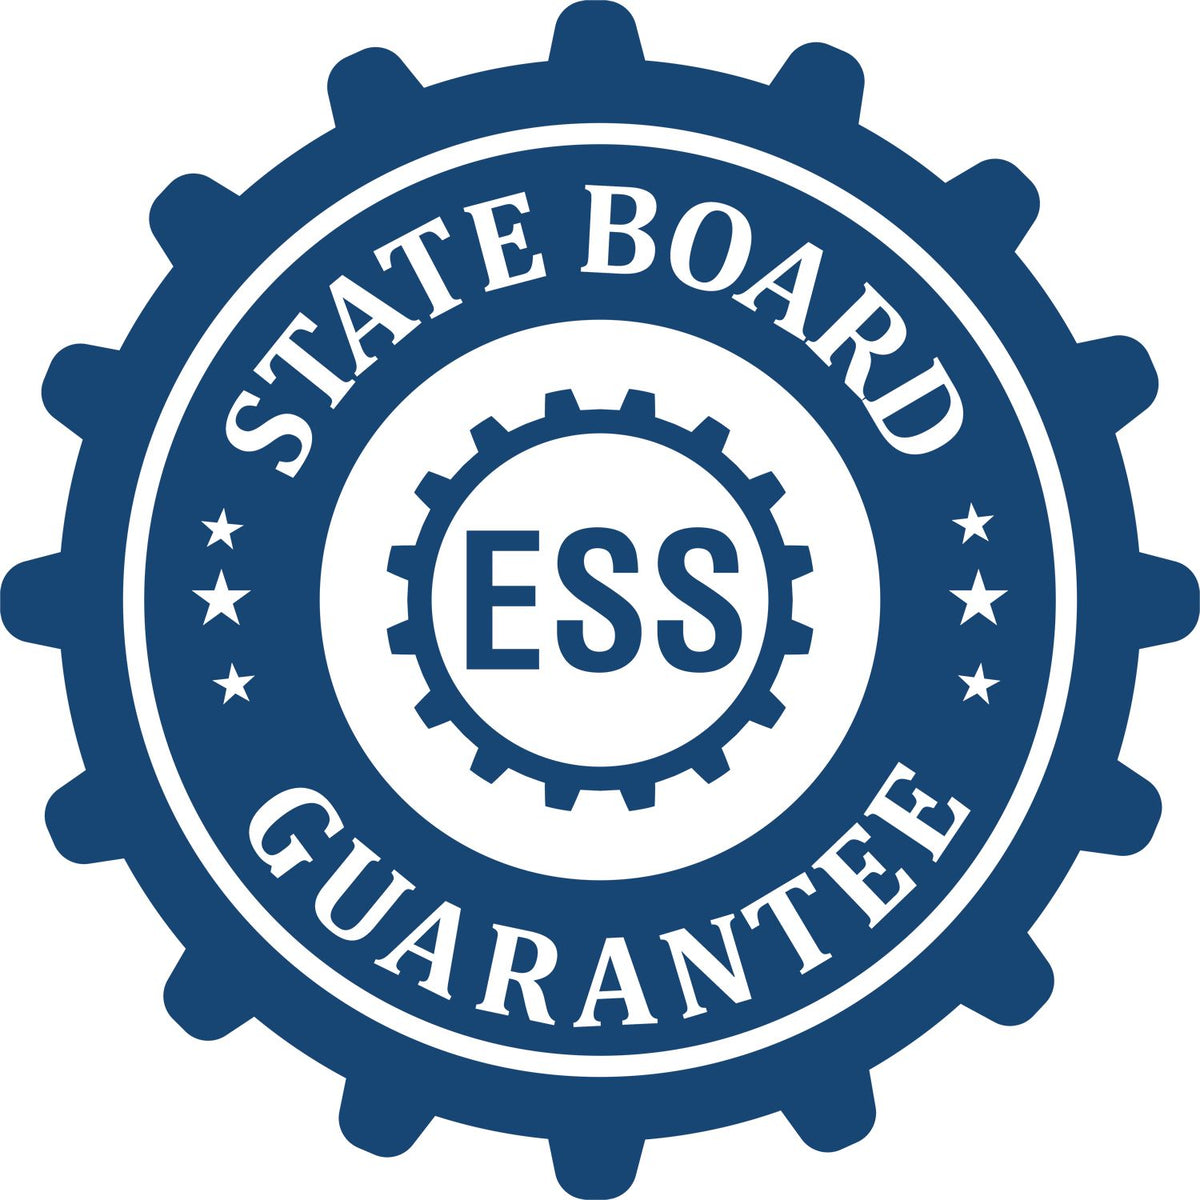 An emblem in a gear shape illustrating a state board guarantee for the State of Virginia Extended Long Reach Geologist Seal